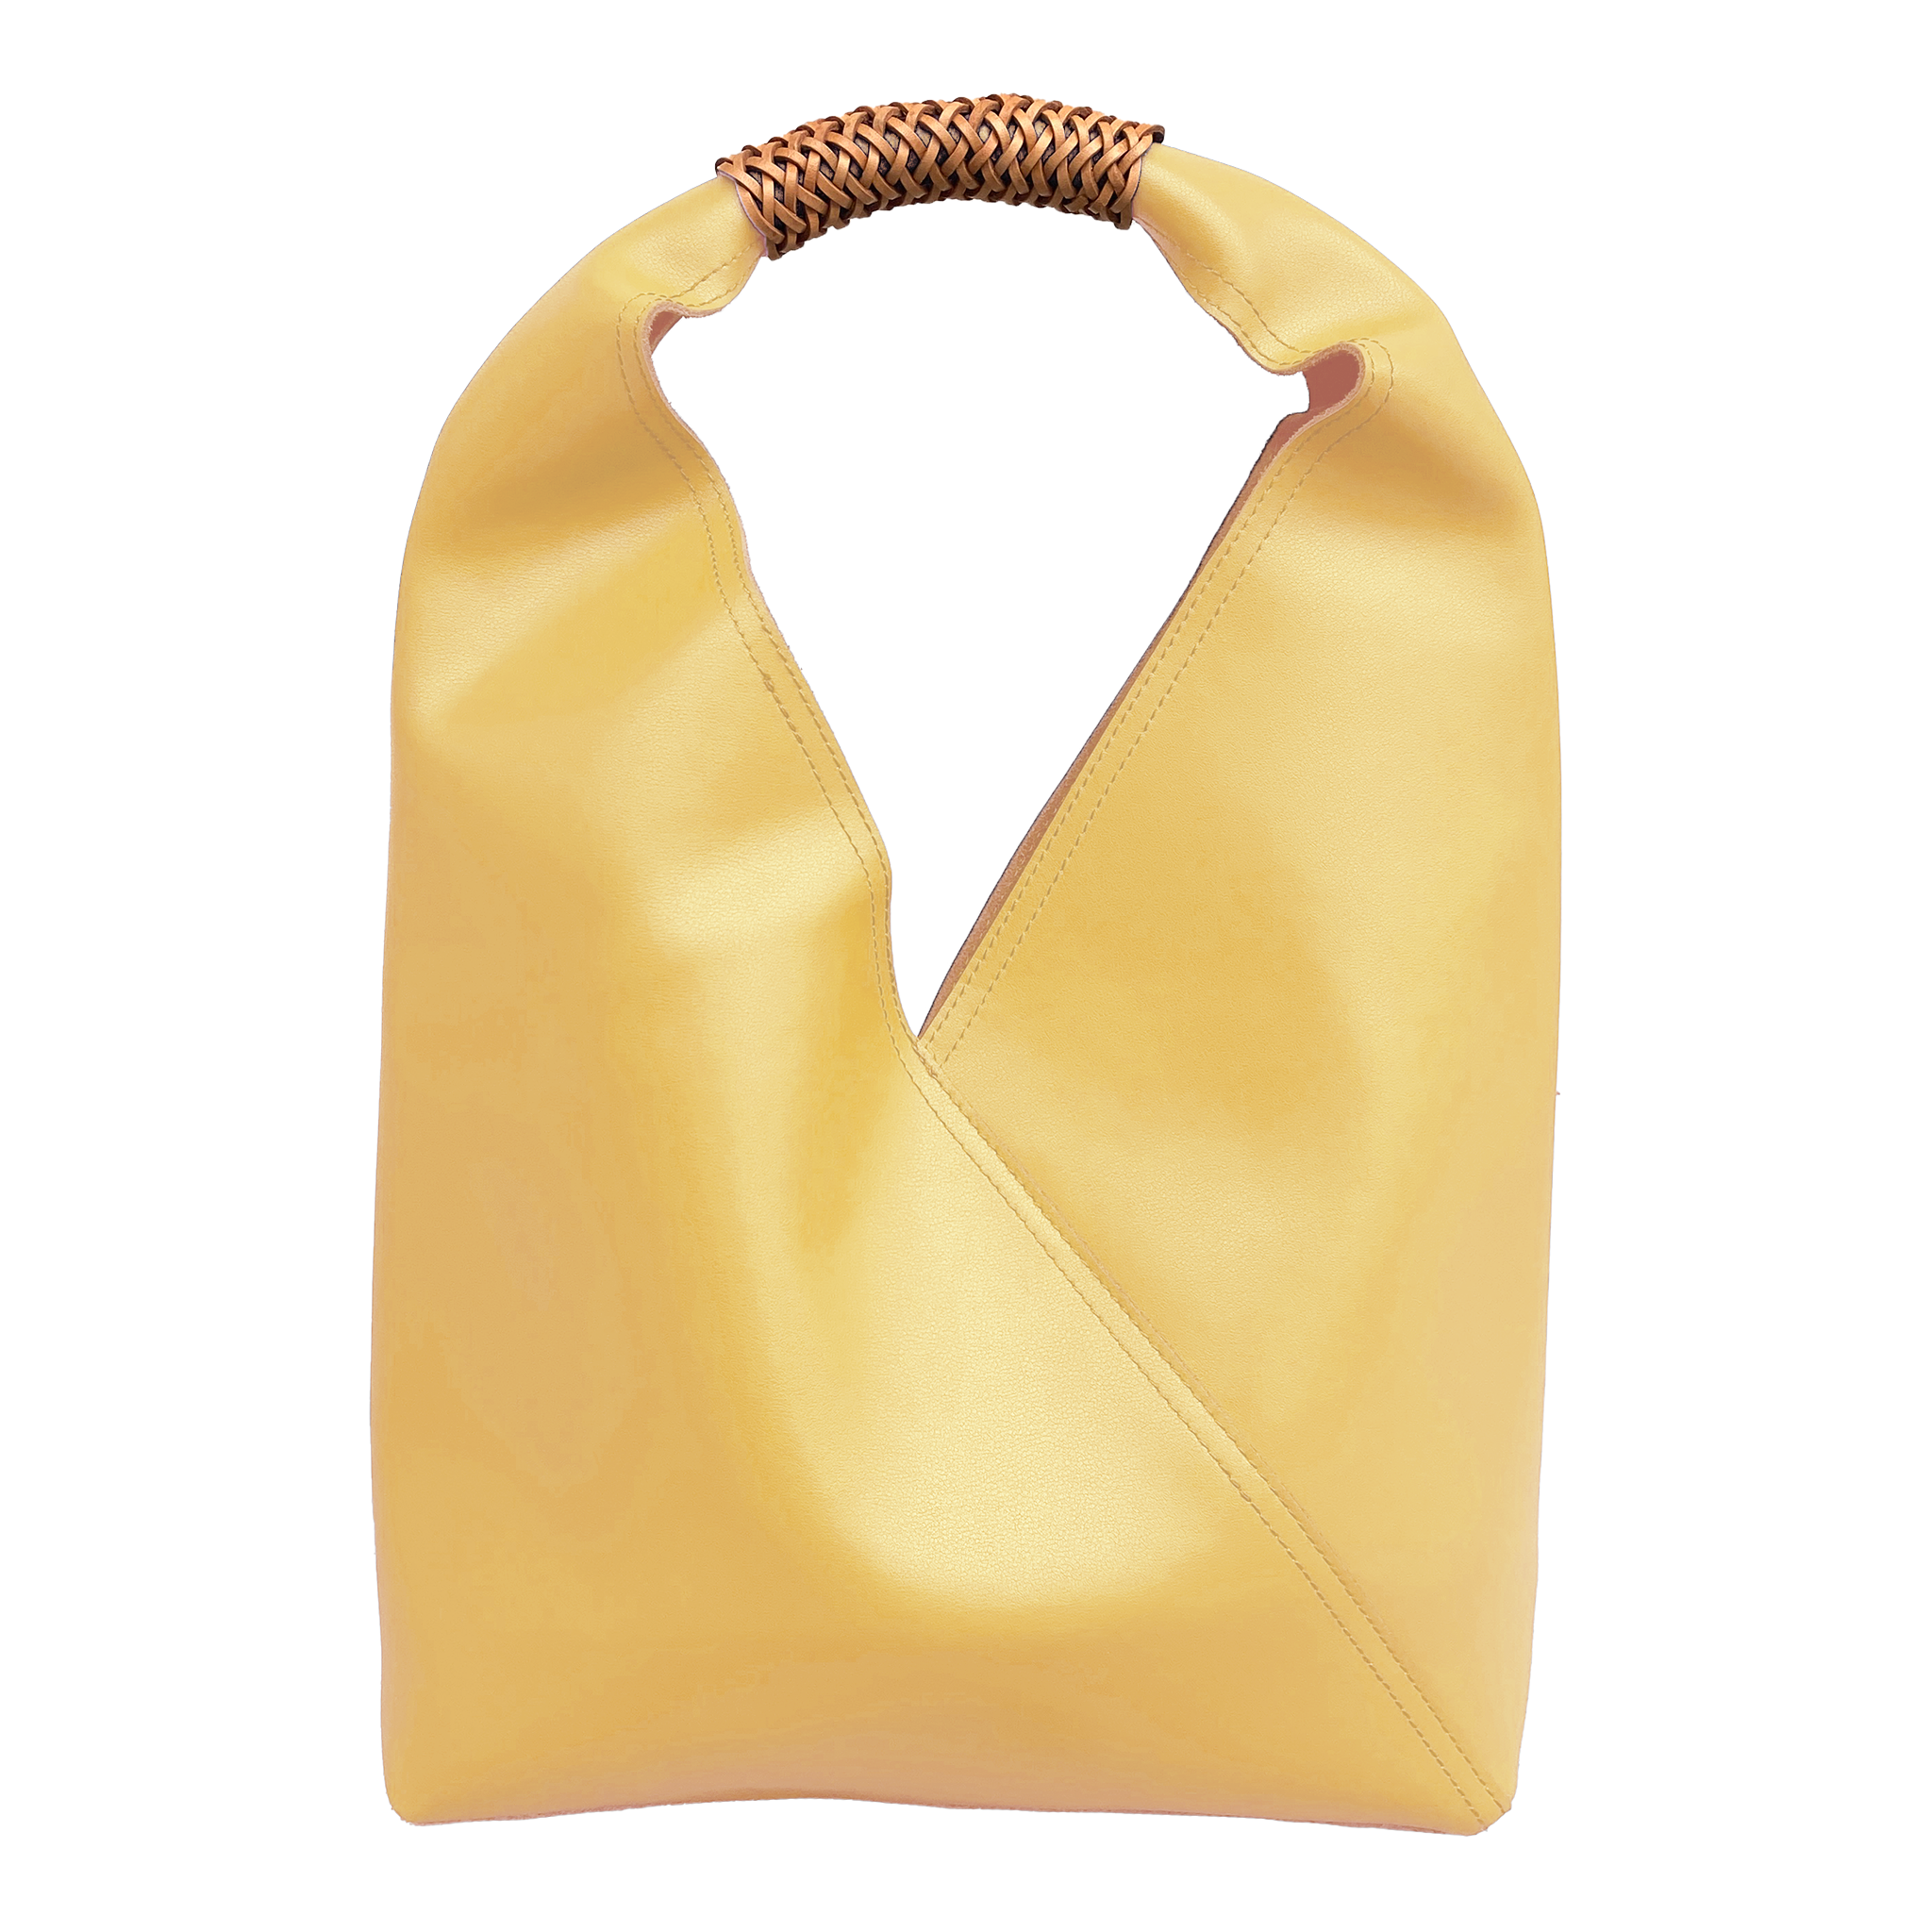 Leather Hobo Bag - Butter Yellow